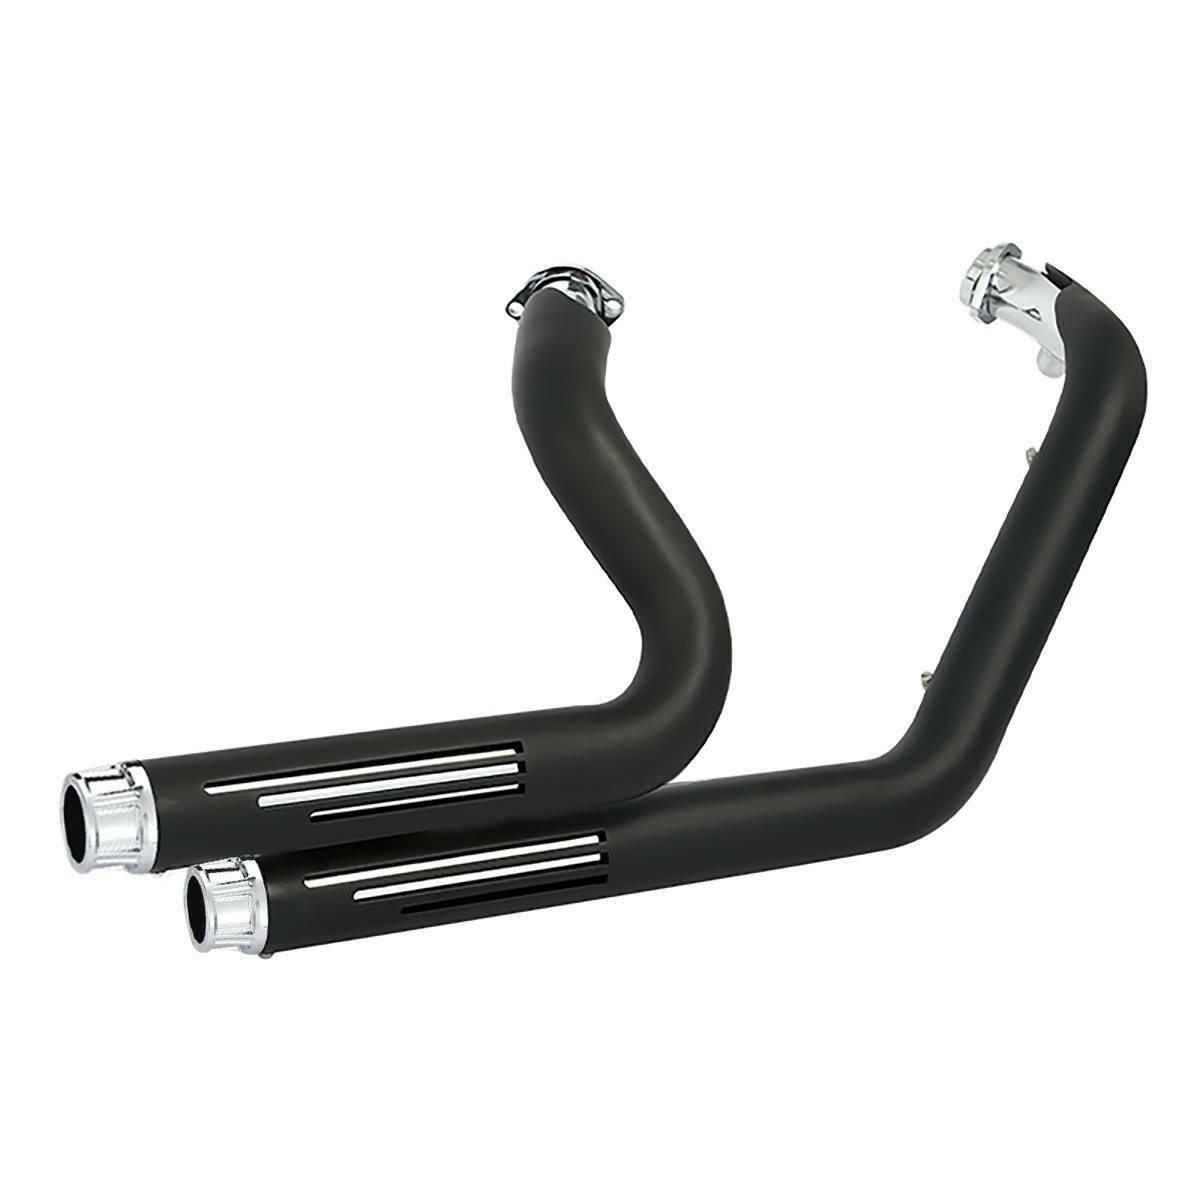 CNC Dual Exhaust Muffler Pipe Fit For Harley Dyna Low Rider Fat Bob Drag 10-17 - Moto Life Products